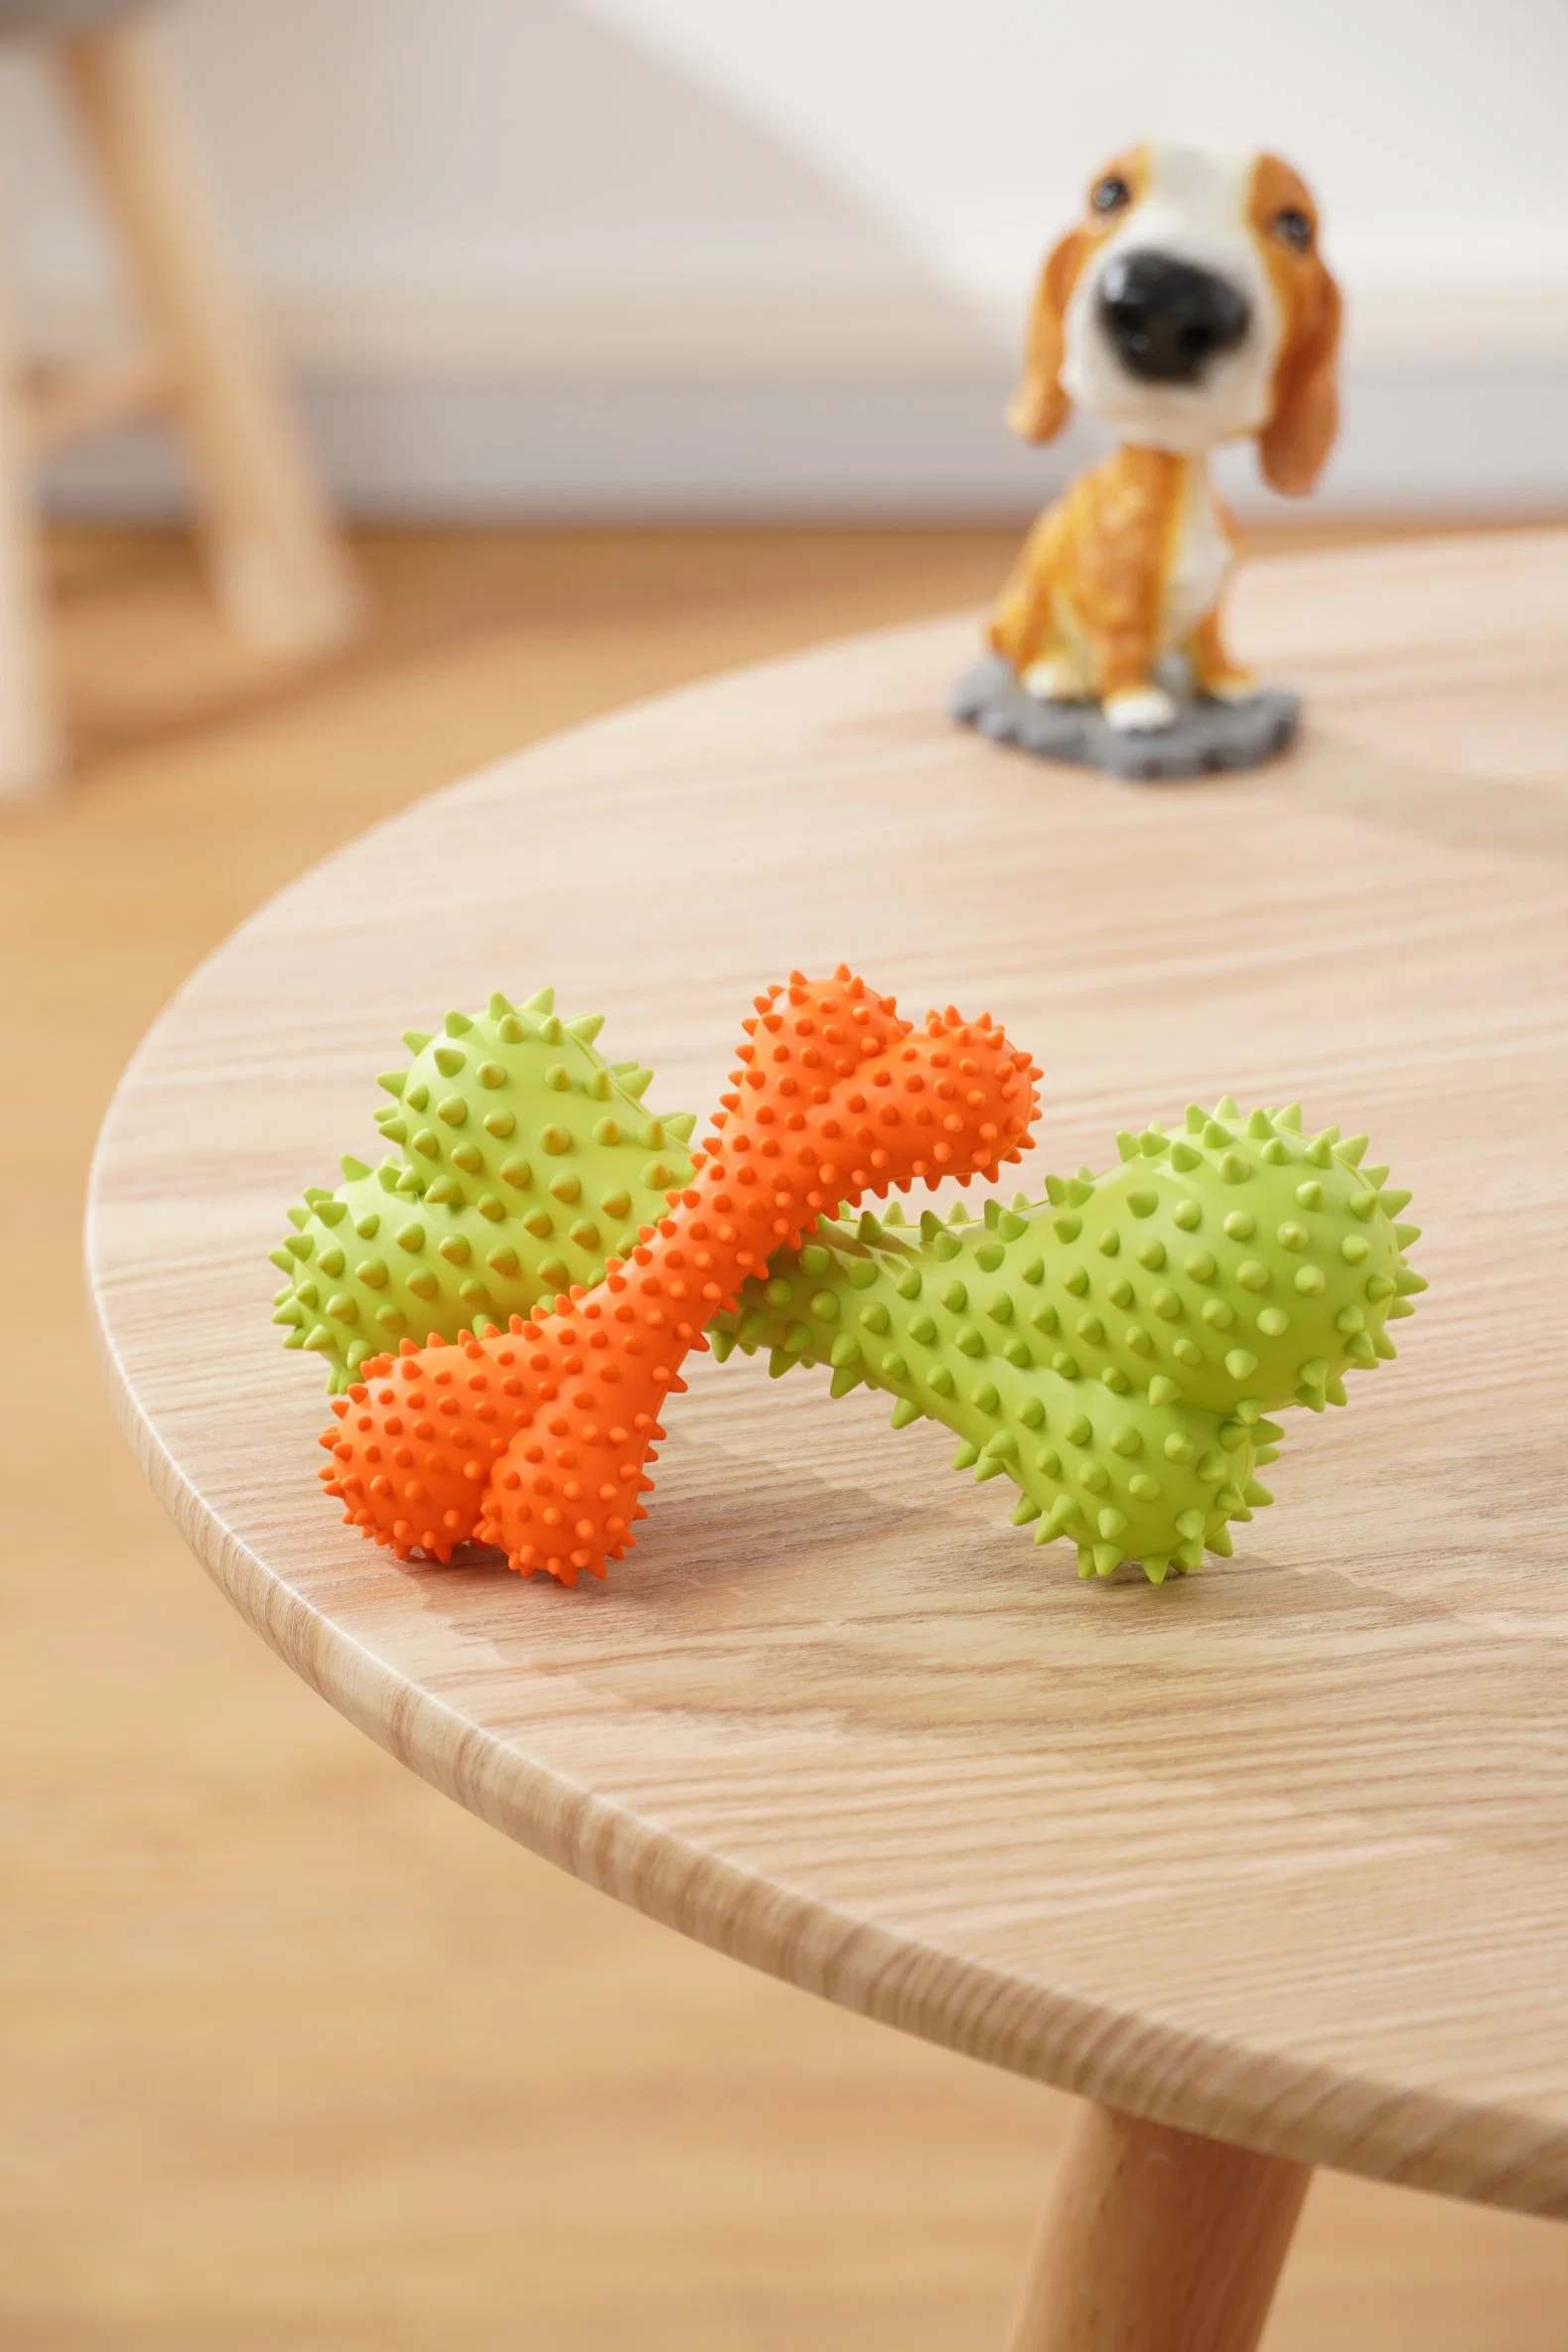 Amazon Pet Toy Hot Sale Rubber Cleaning Spiky Rubber Dog Mastique el juguete -hueso